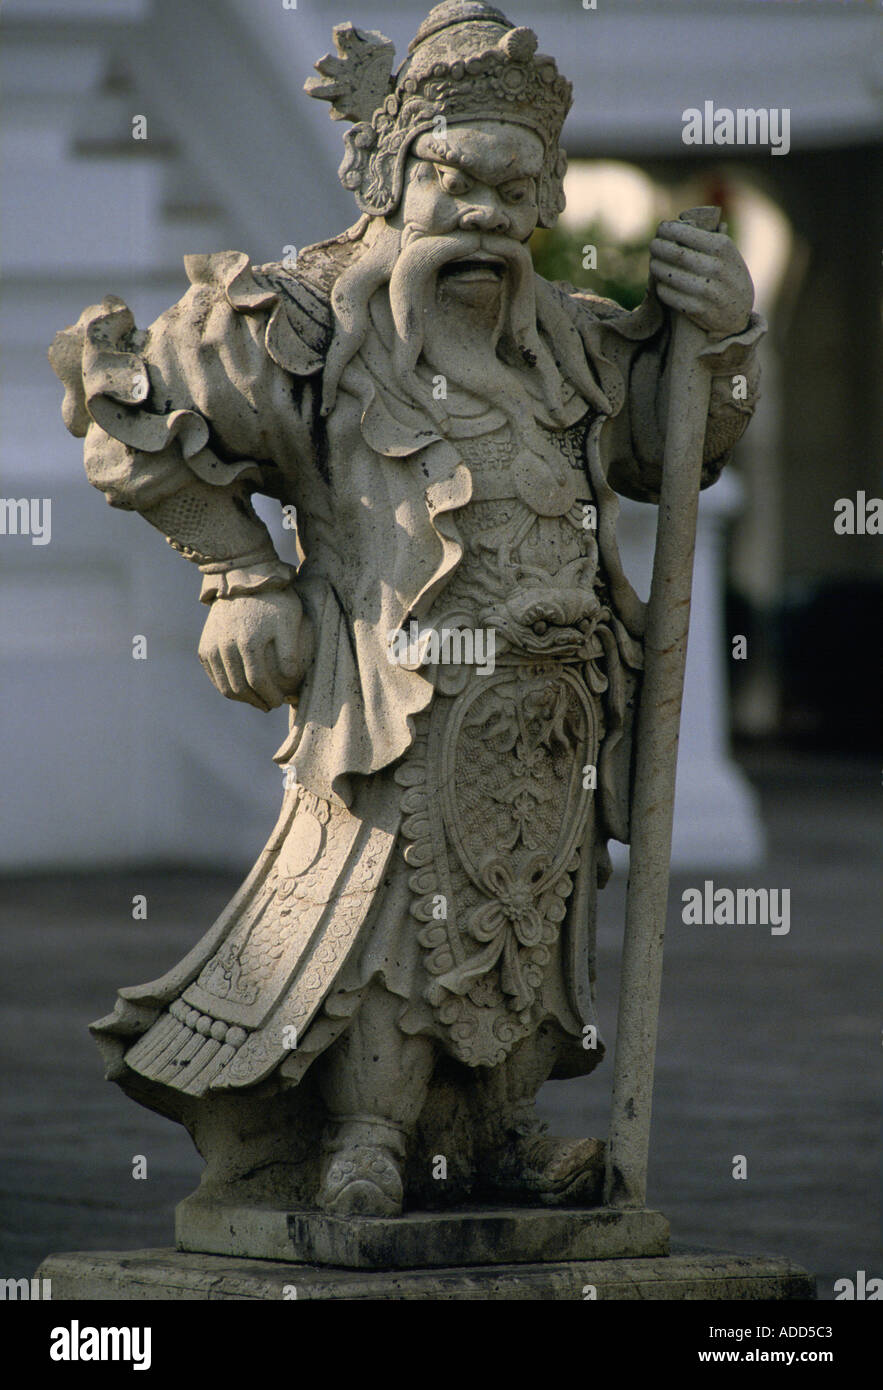 Ancient stone statue ofman dressed in long robes holding a staff at the Grand Palace Bangkok Thailand Stock Photo